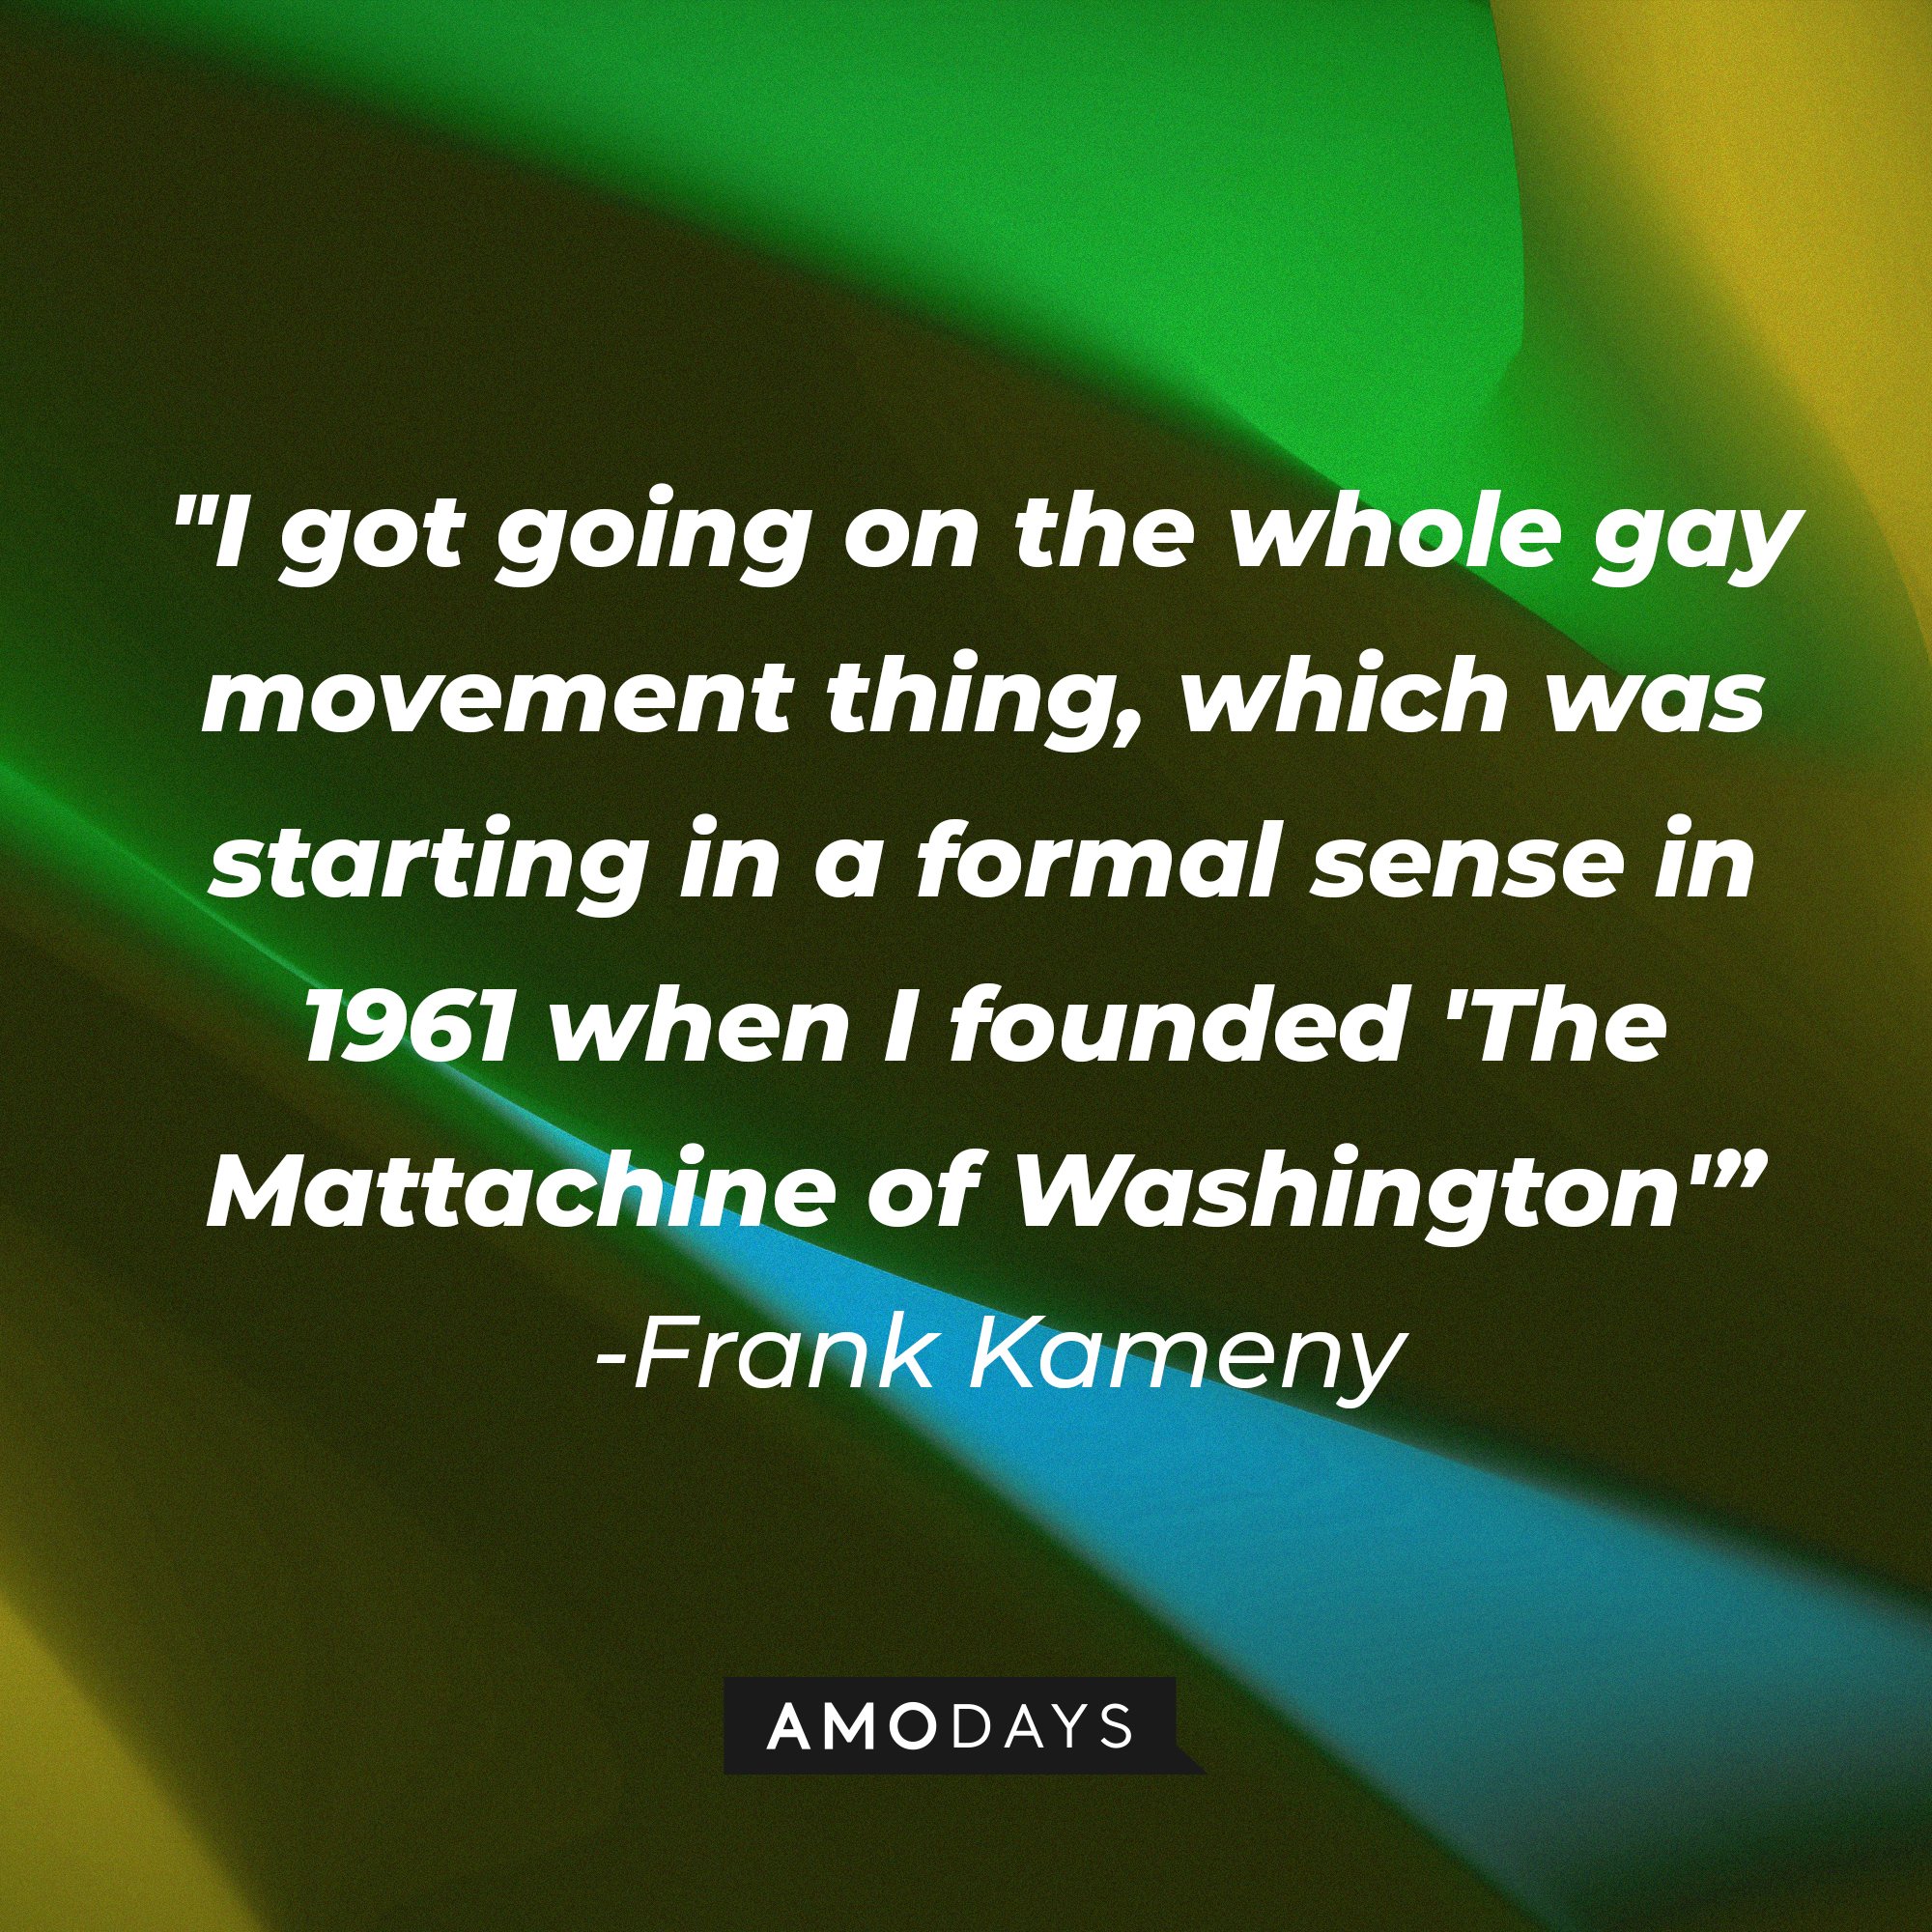 Frank Kameny's quote: "I got going on the whole gay movement thing, which was starting in a formal sense in 1961 when I founded 'The Mattachine  of Washington'” | Image: AmoDays